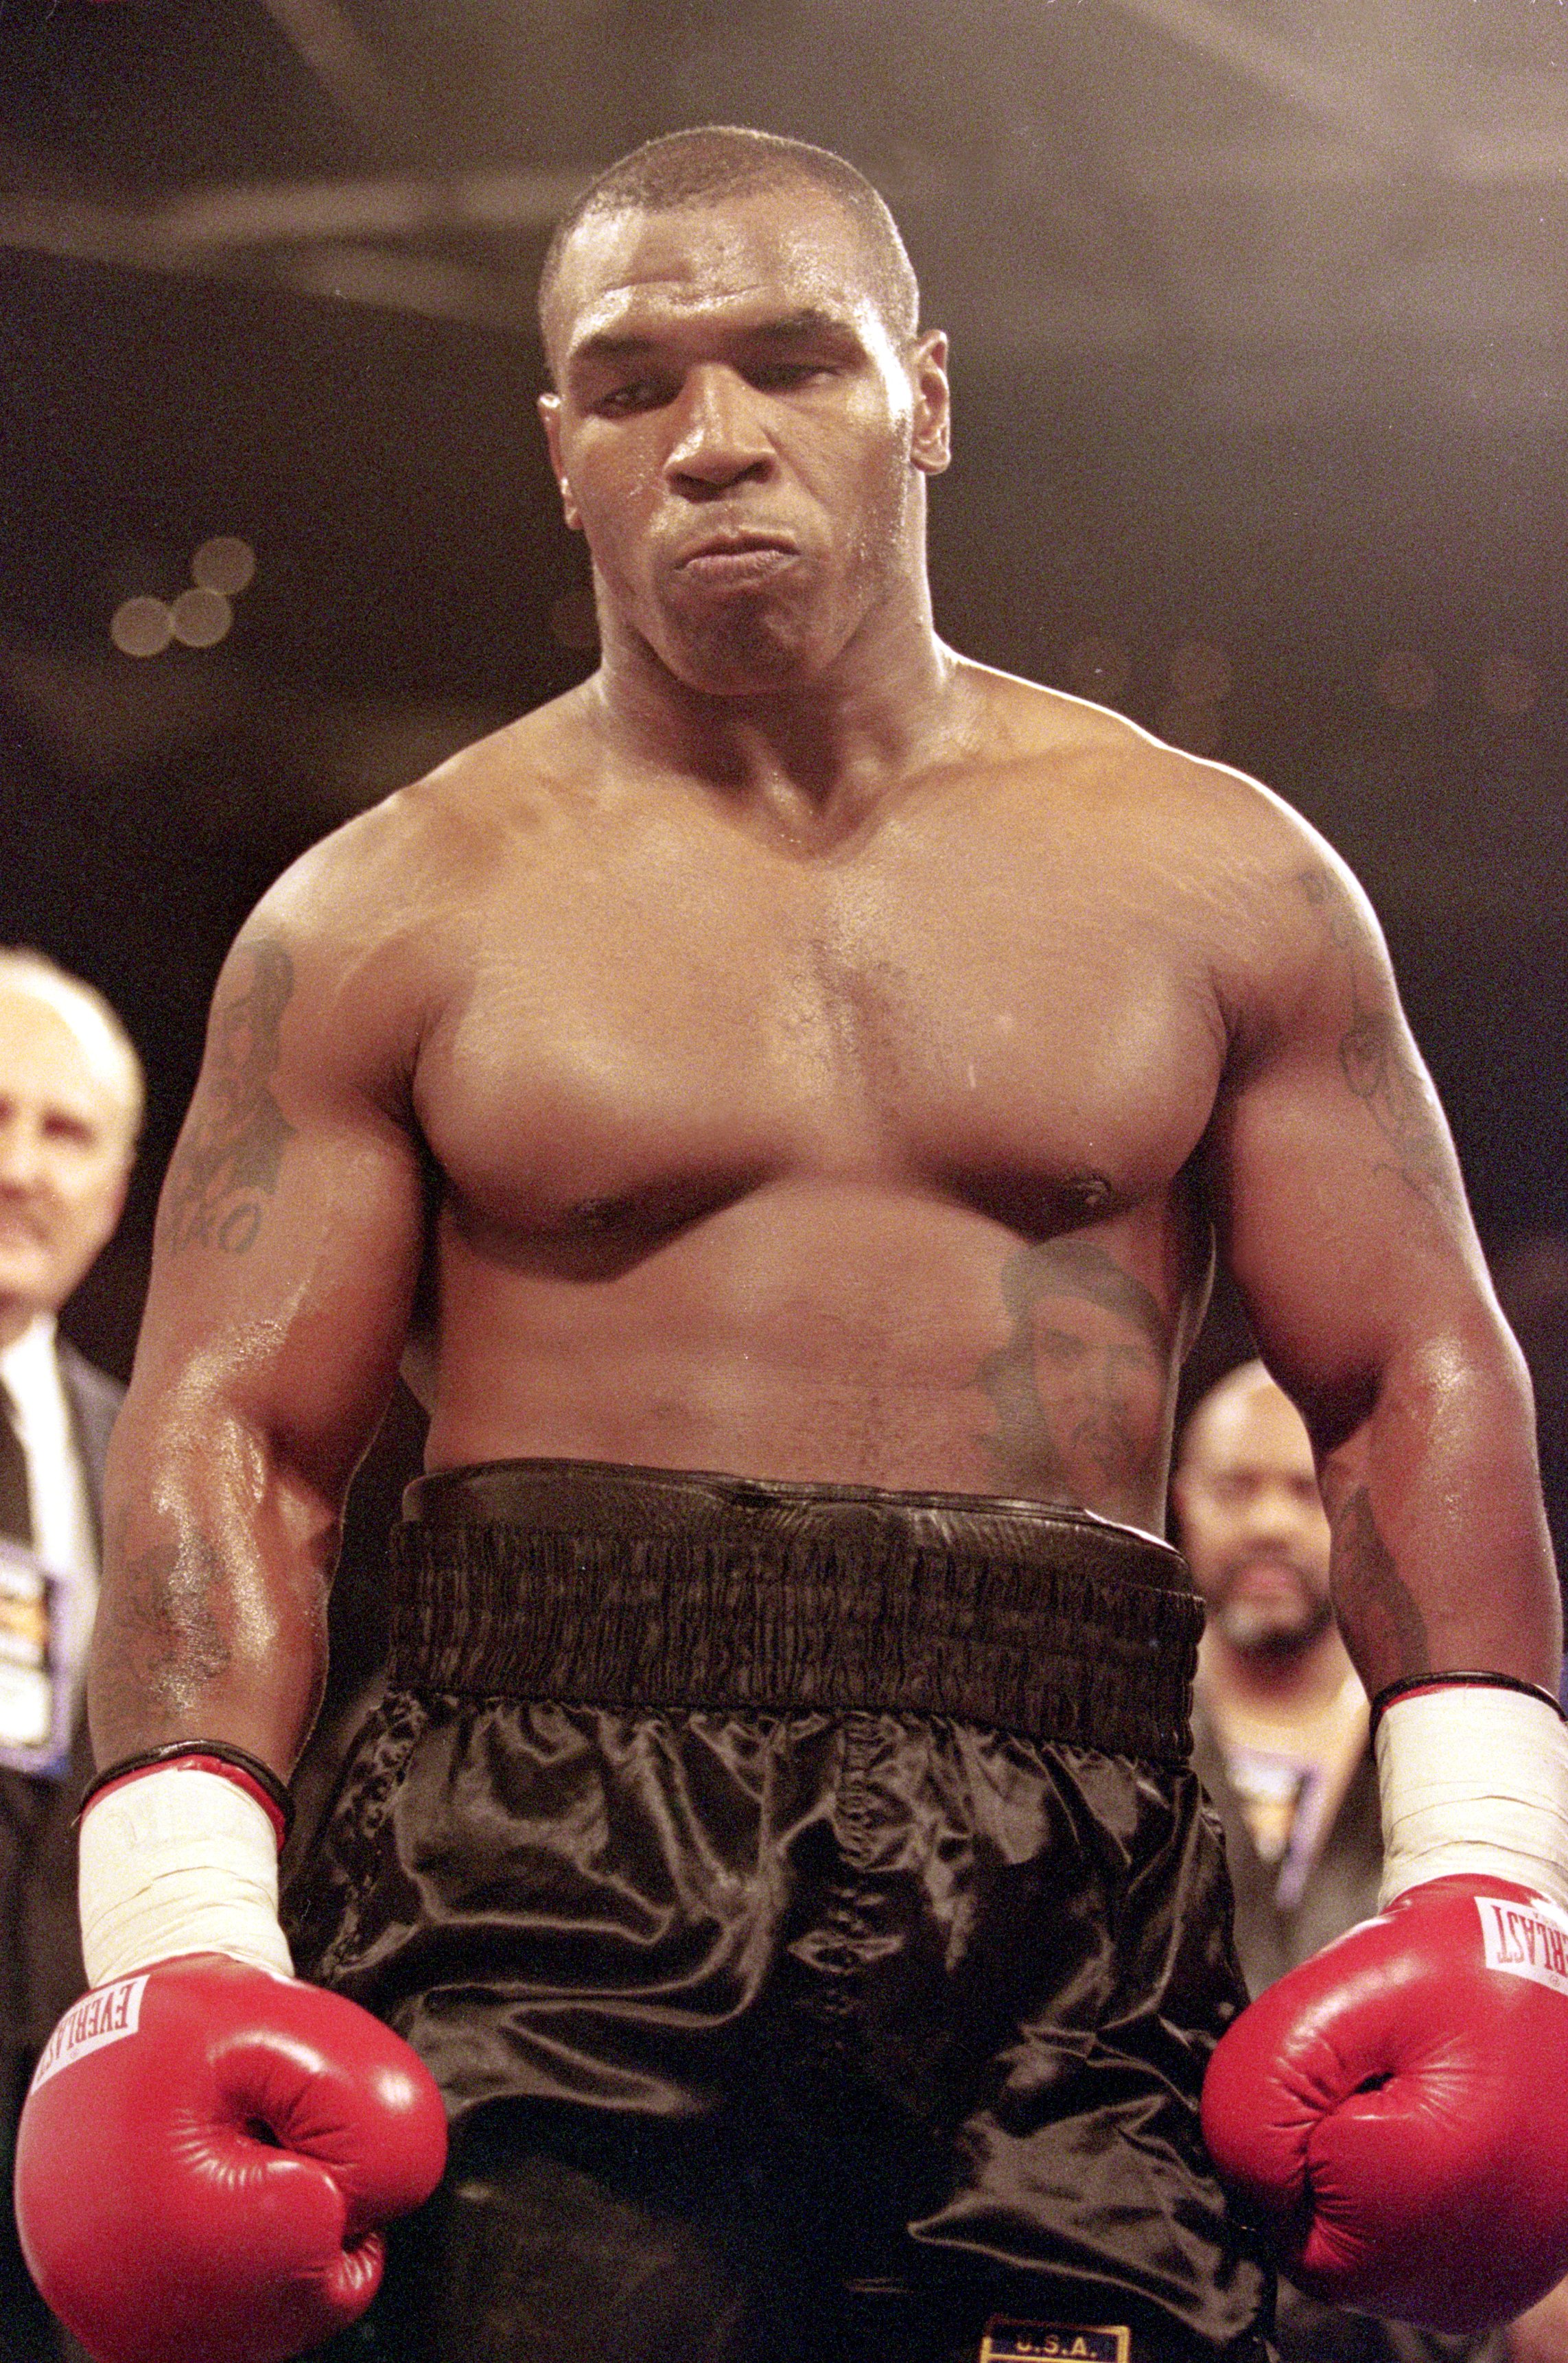 The best pound-for-pound boxers of the past 30 years